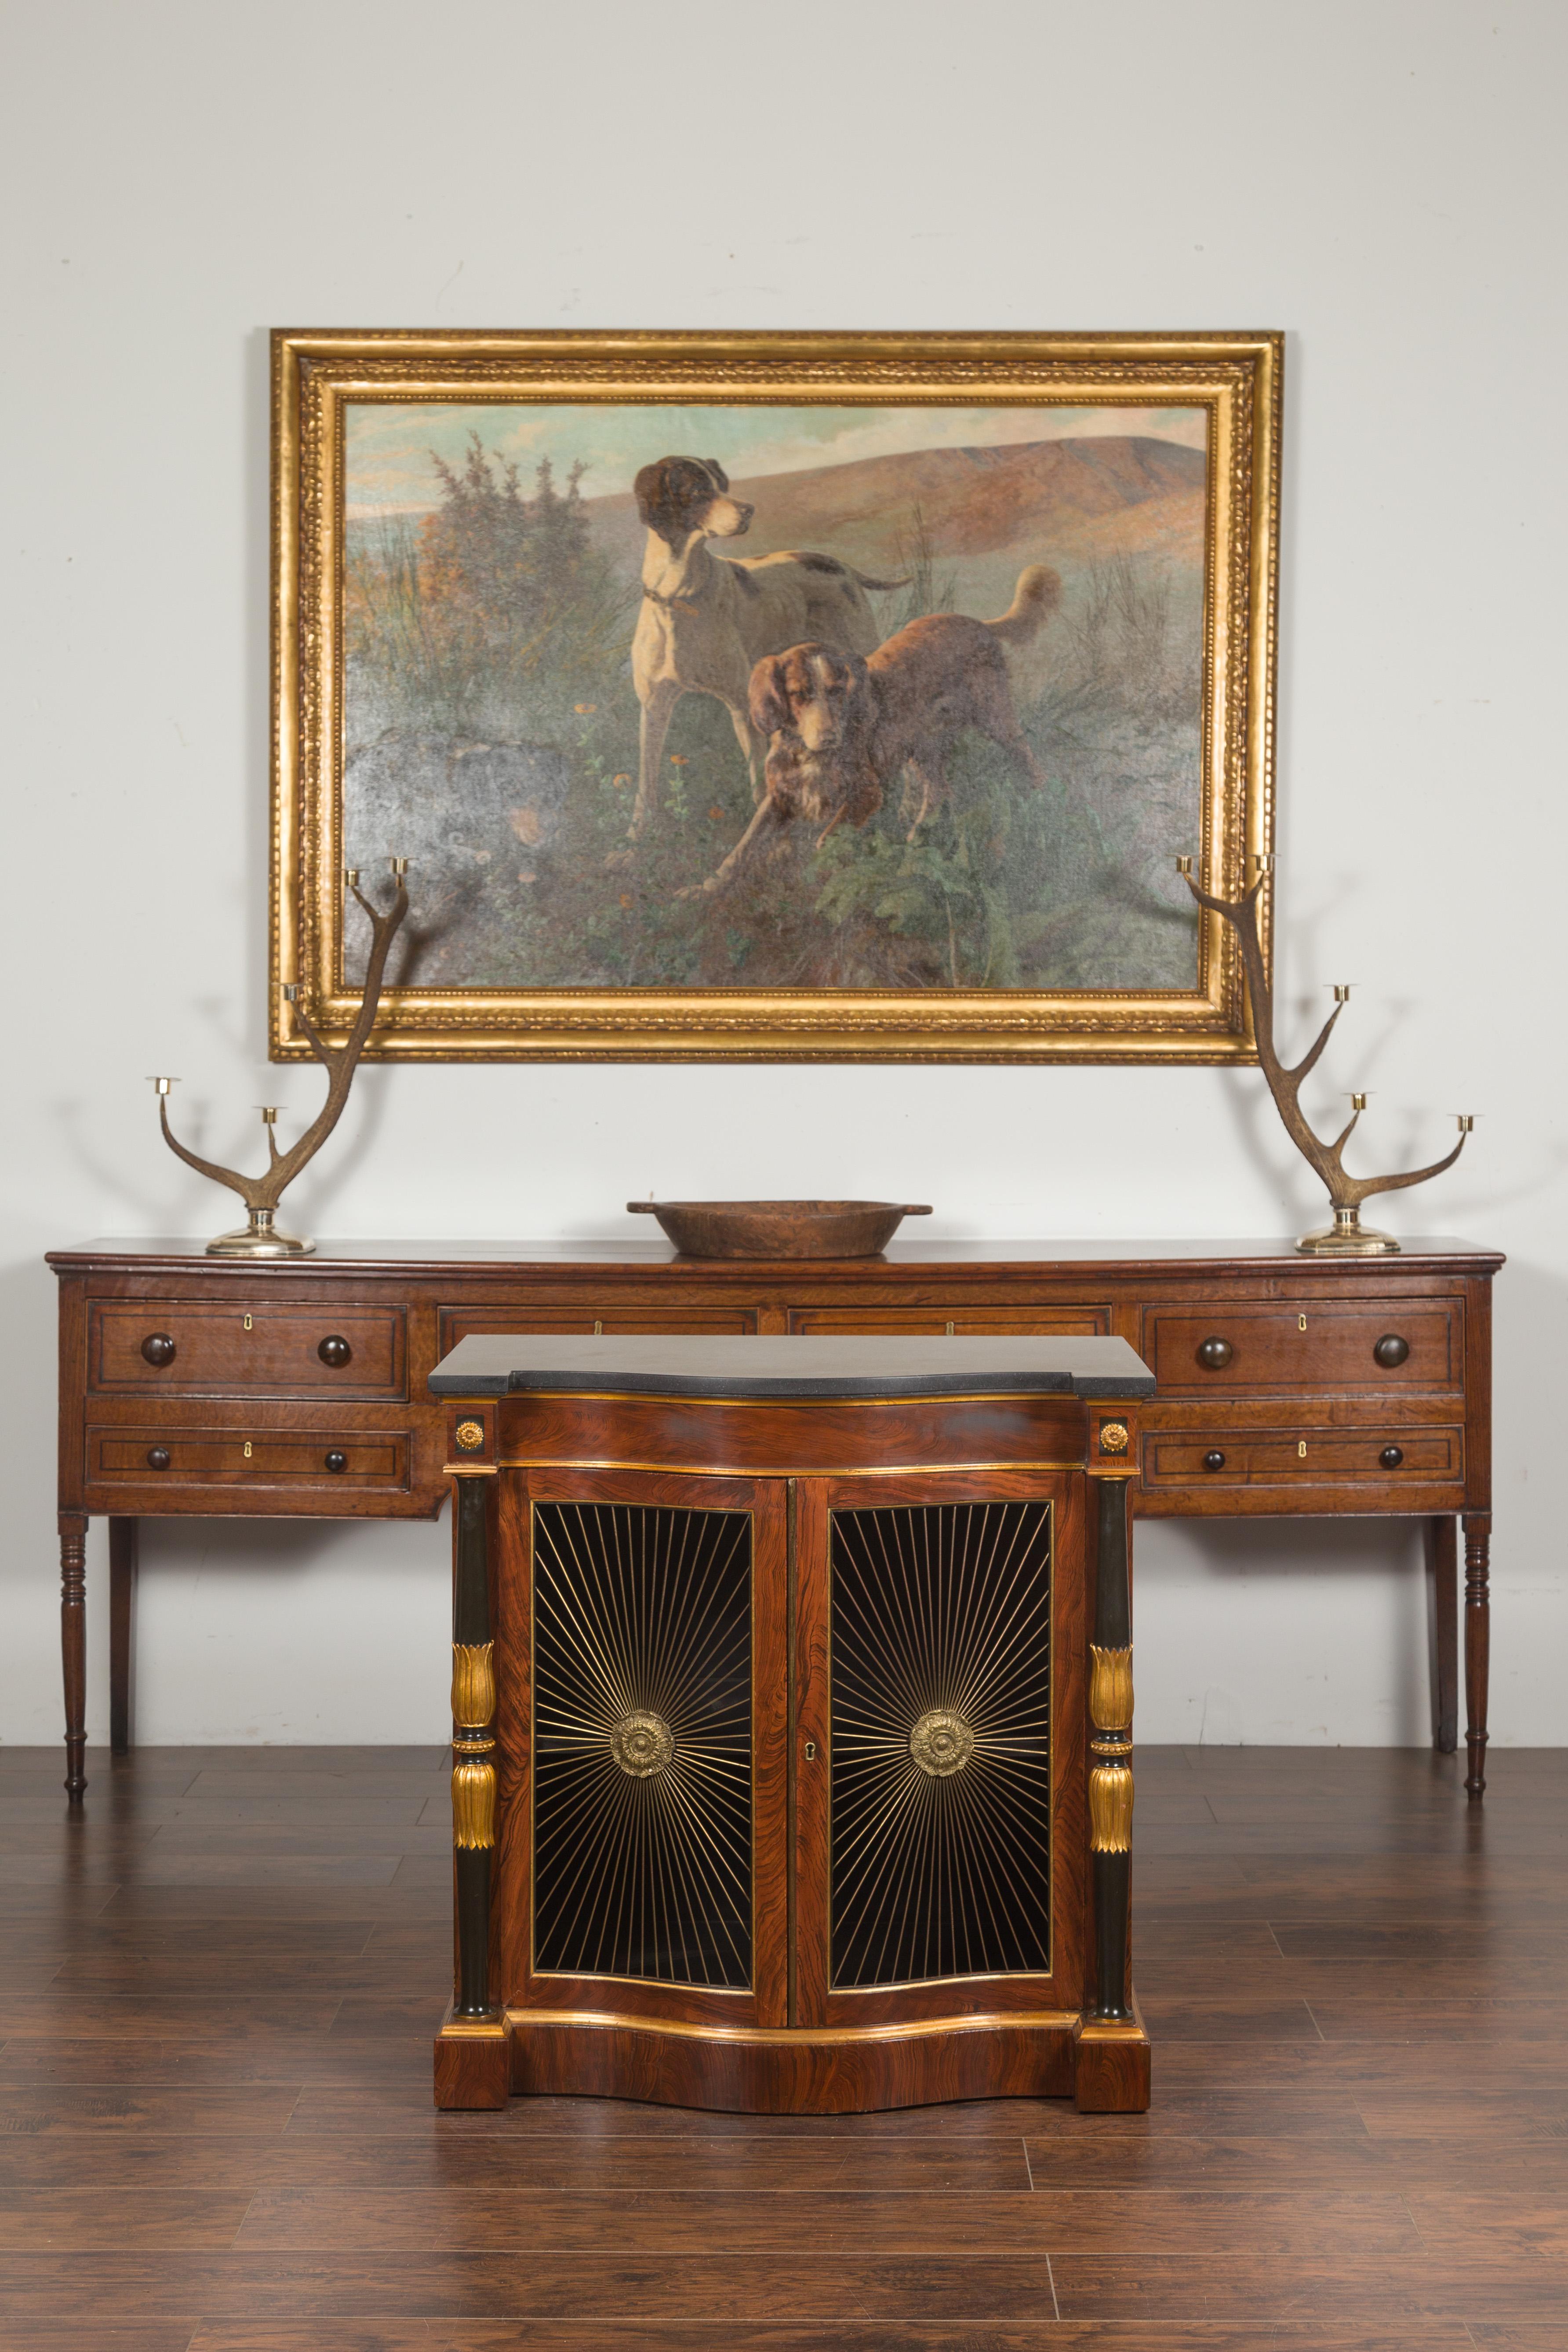 An English Regency style faux rosewood painted console cabinet from the early 20th century, with gilt accents and marble top. Created in England during the first quarter of the 20th century, this Regency style cabinet attracts our attention with its